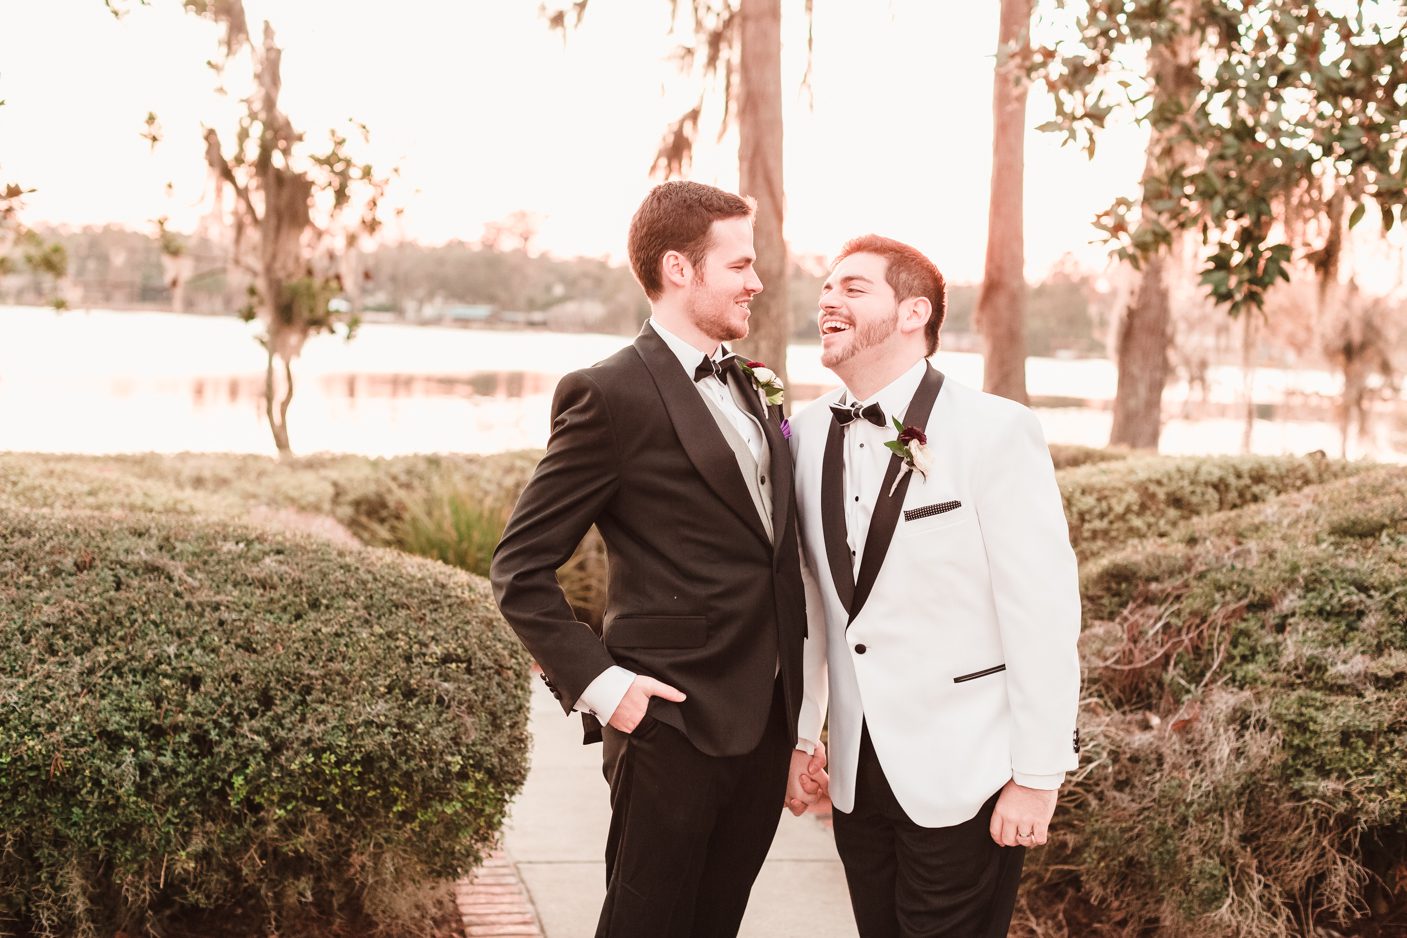 Two grooms celebrate after getting married at their gay wedding at Cypress Grove Estate House in Orlando